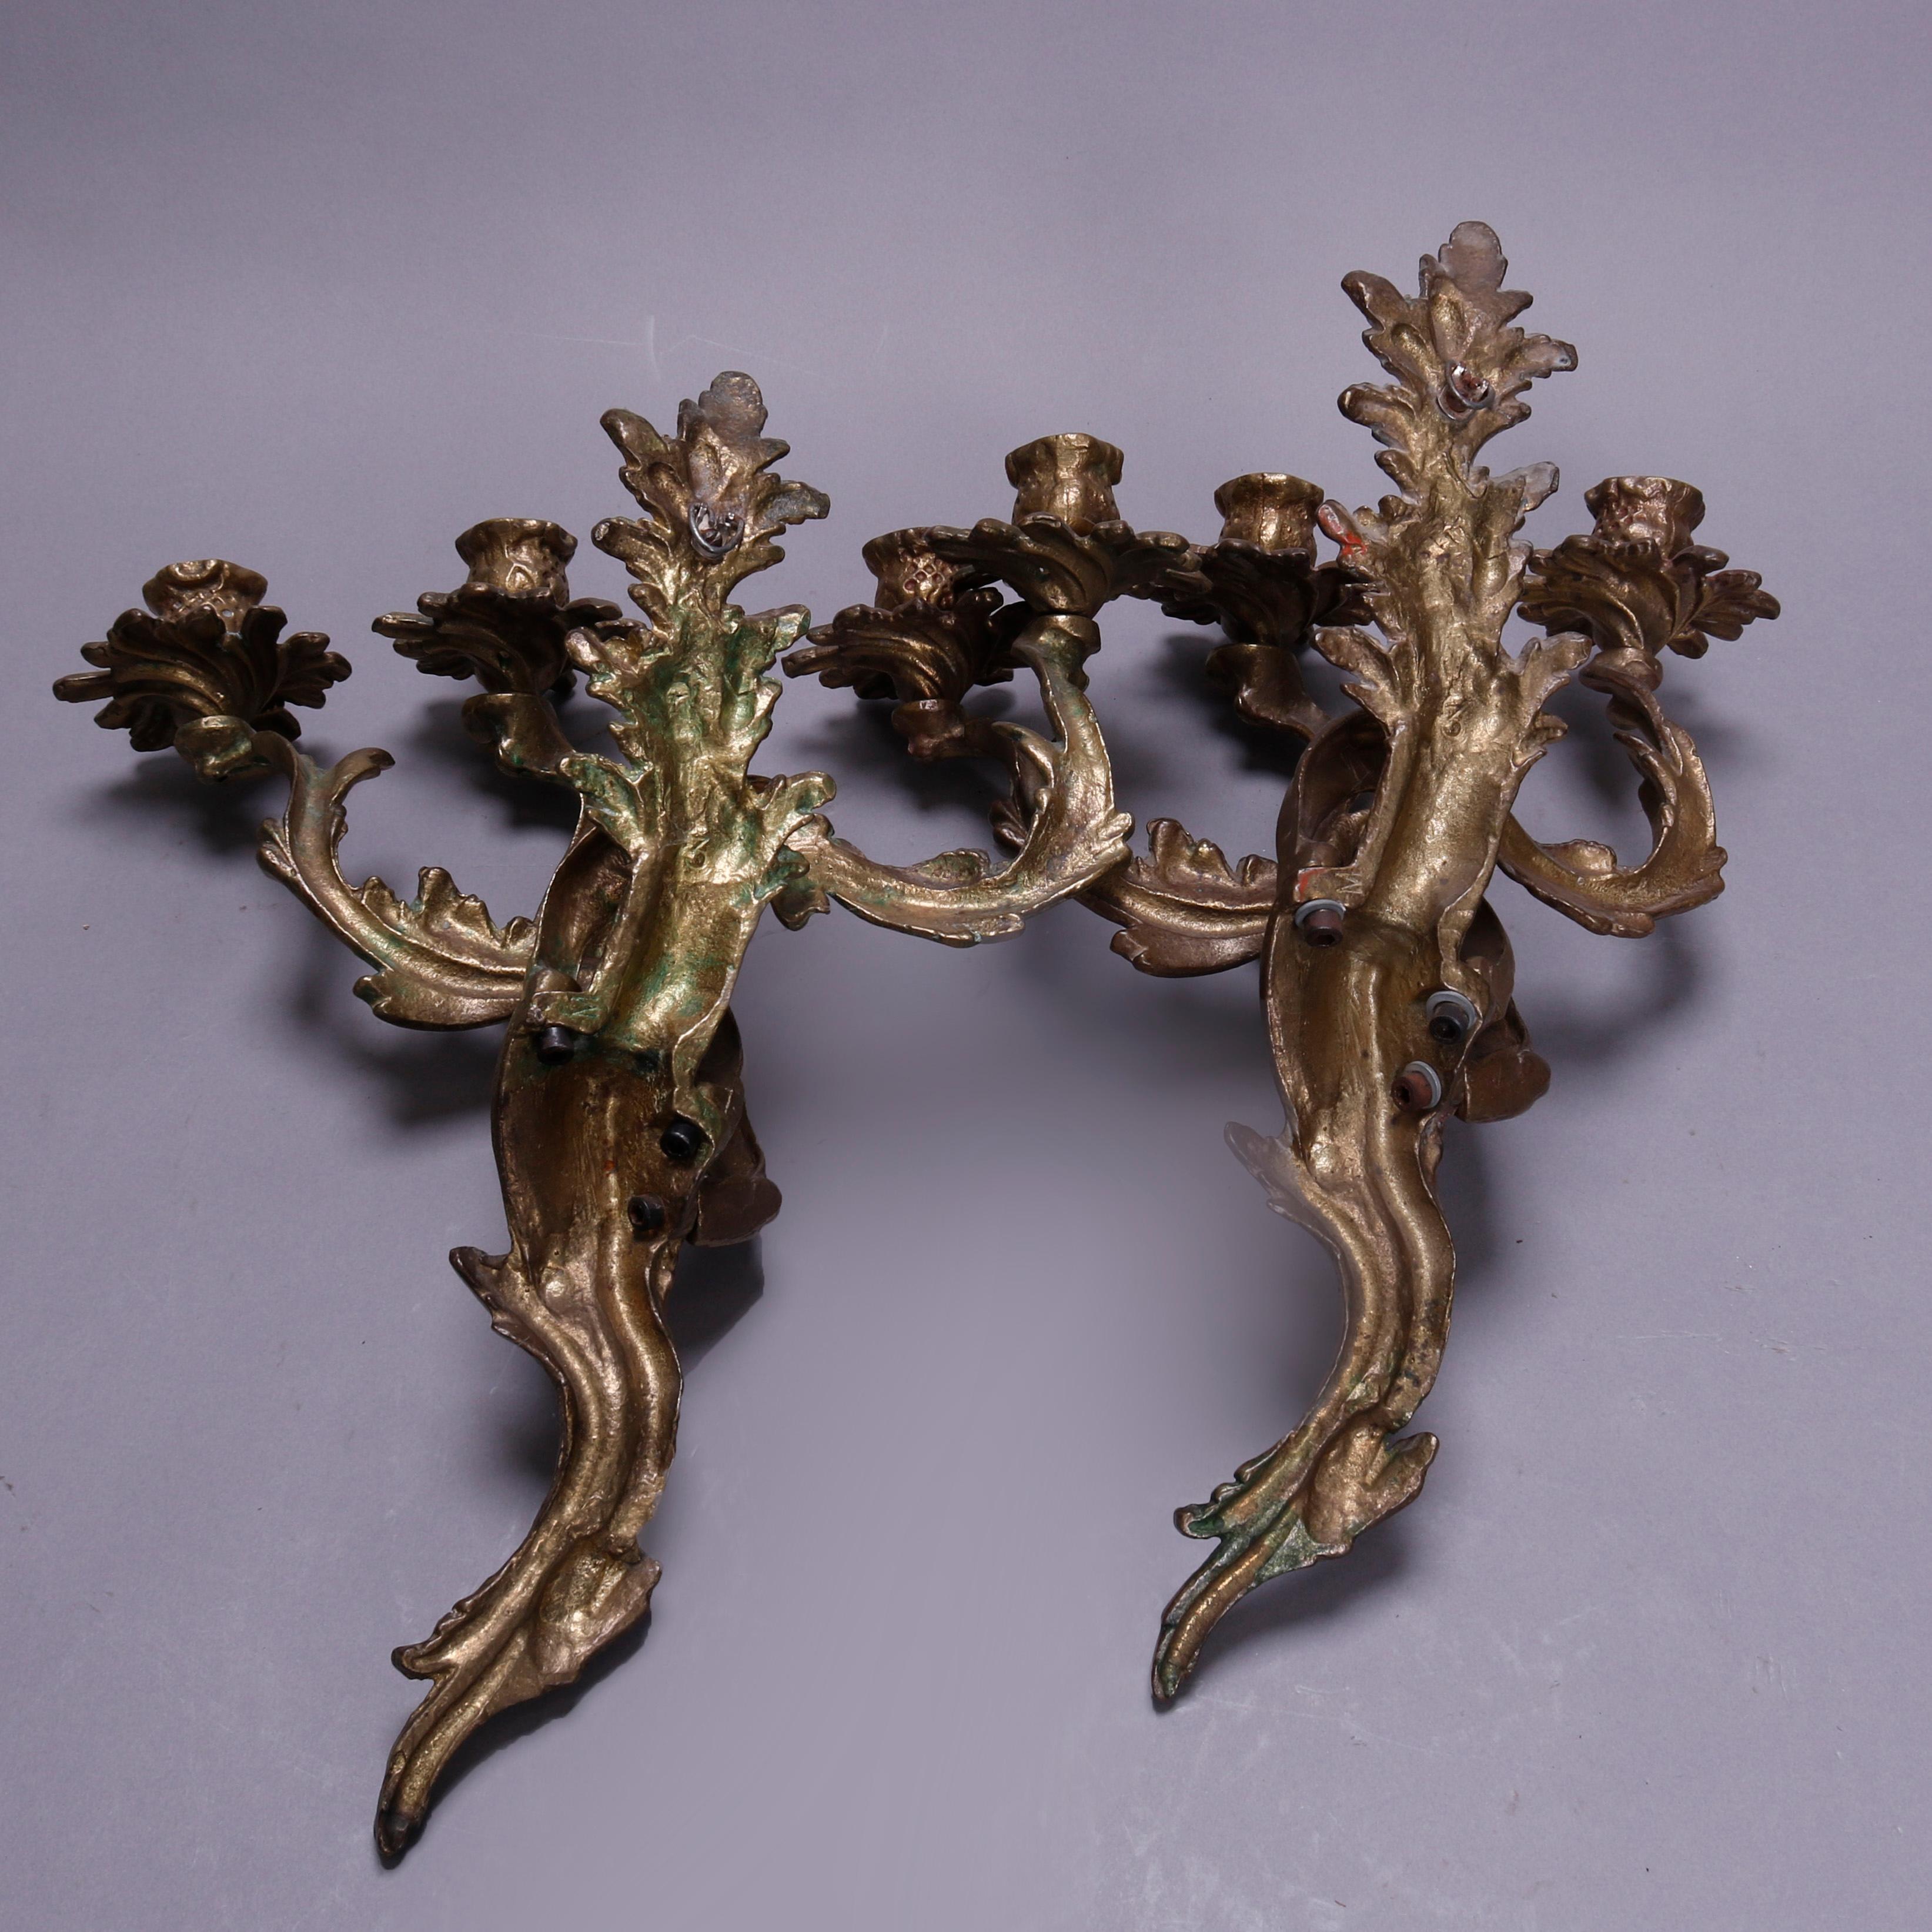 An antique pair of French Louis XIV wall sconces offer gilt cast metal construction in foliate form having three arms terminating in candle sockets, circa 1880. 

Measures: 15